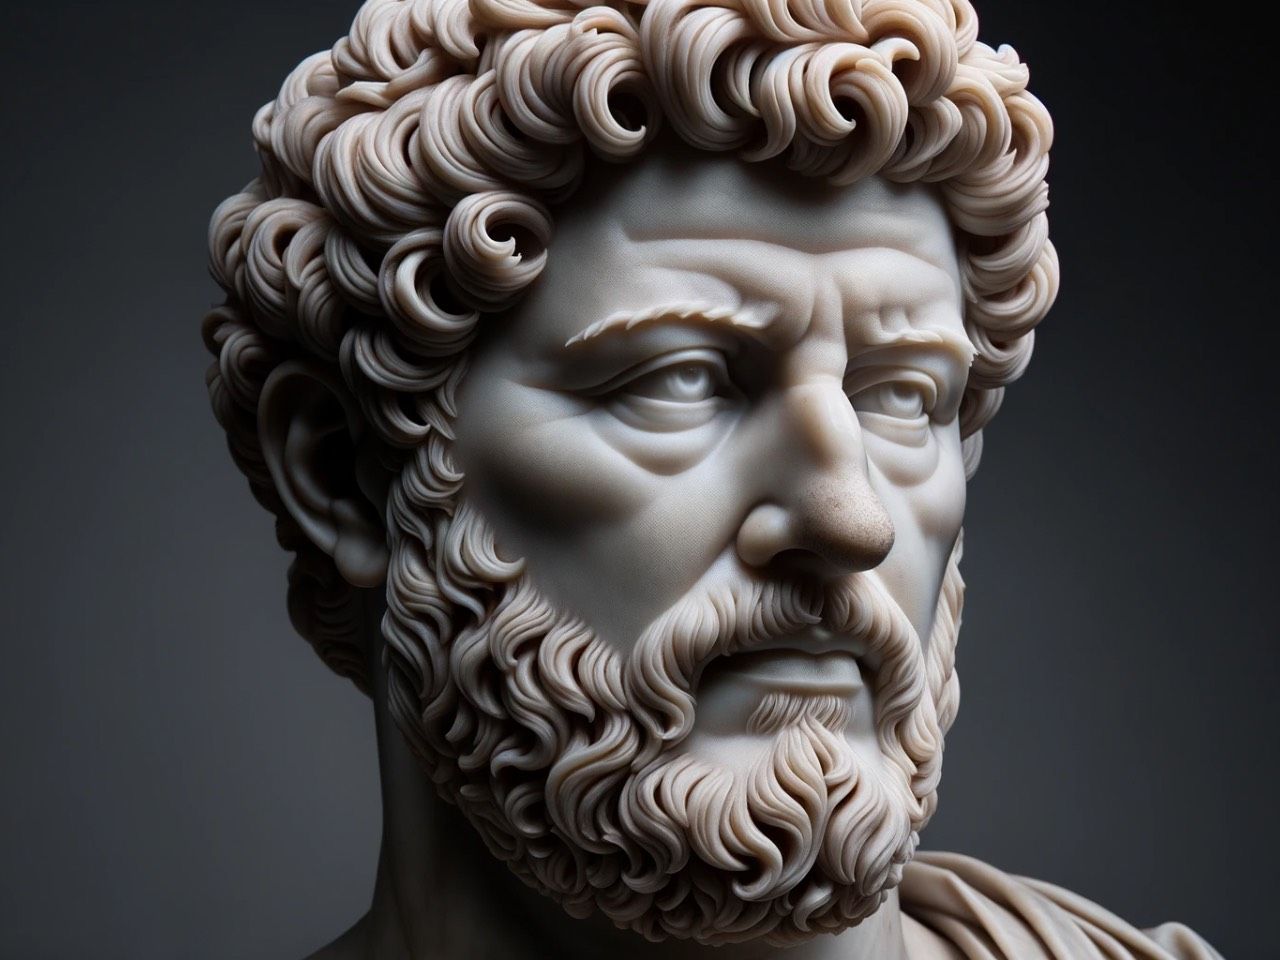 Sculpture bust of Marcus Aurelius, the Roman emperor, showing his detailed facial features, with a thoughtful and noble expression.